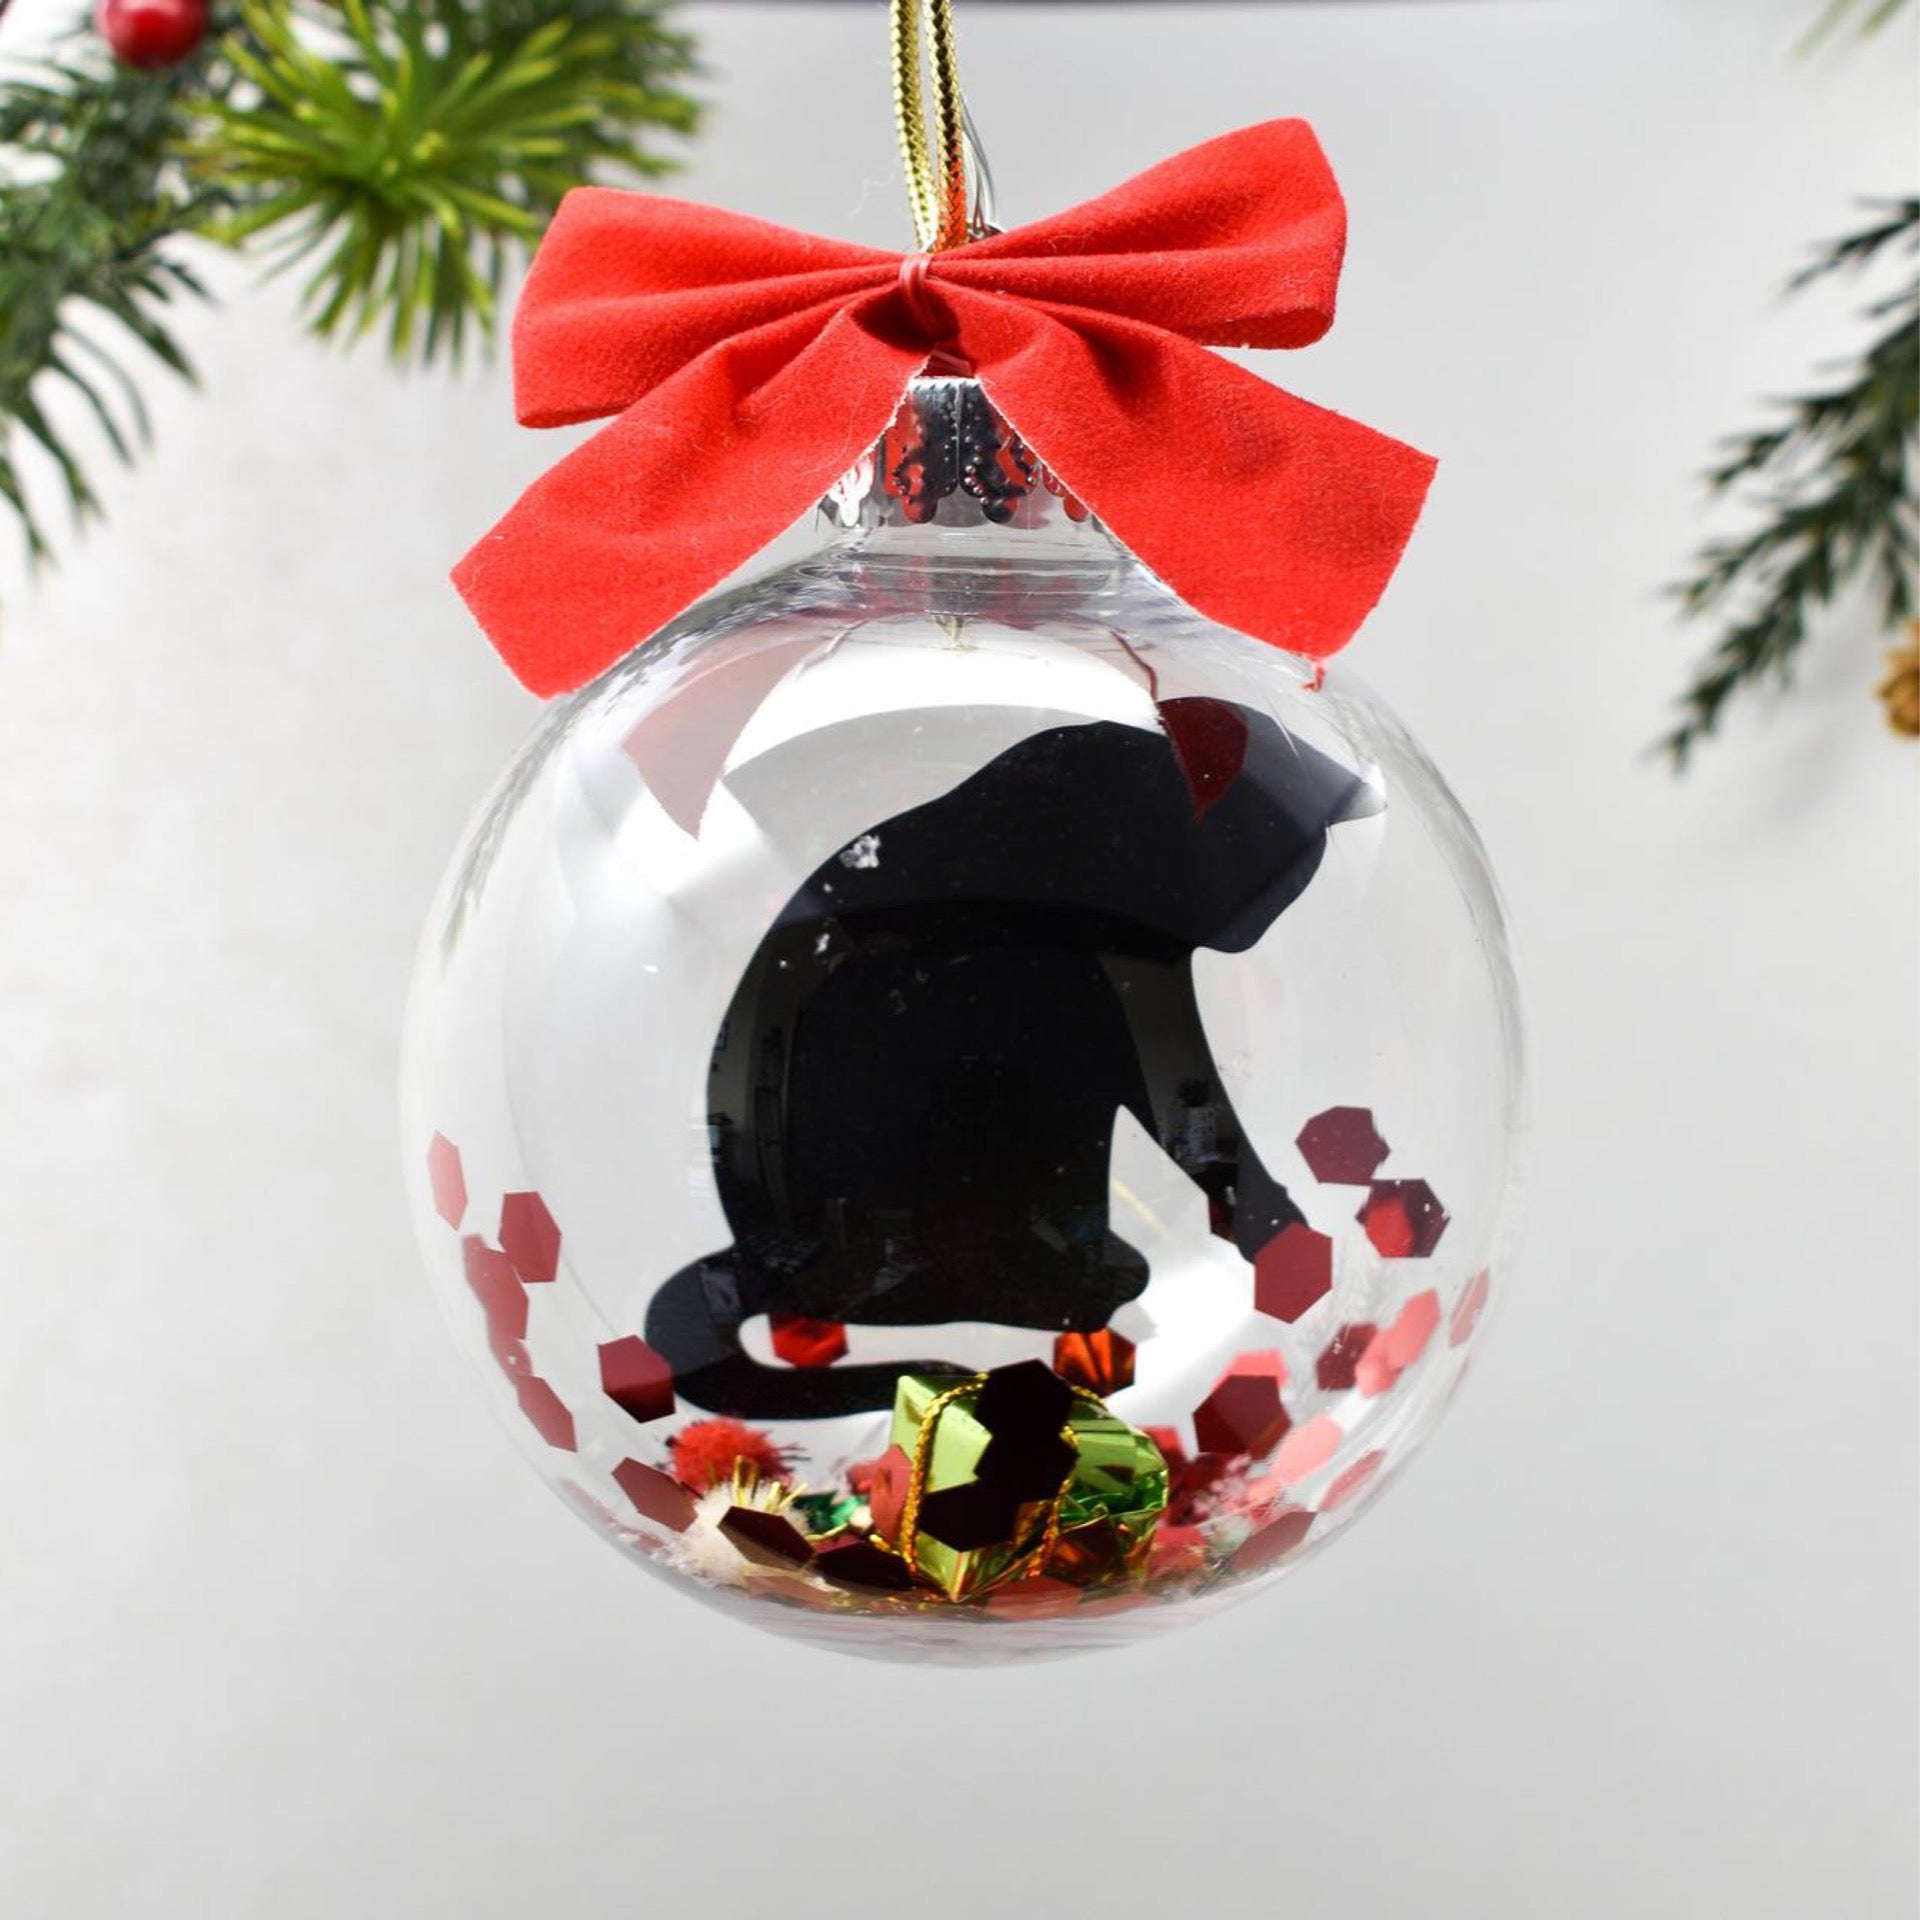 Christmas Ball Ornaments Black Christmas Tree Decorations with